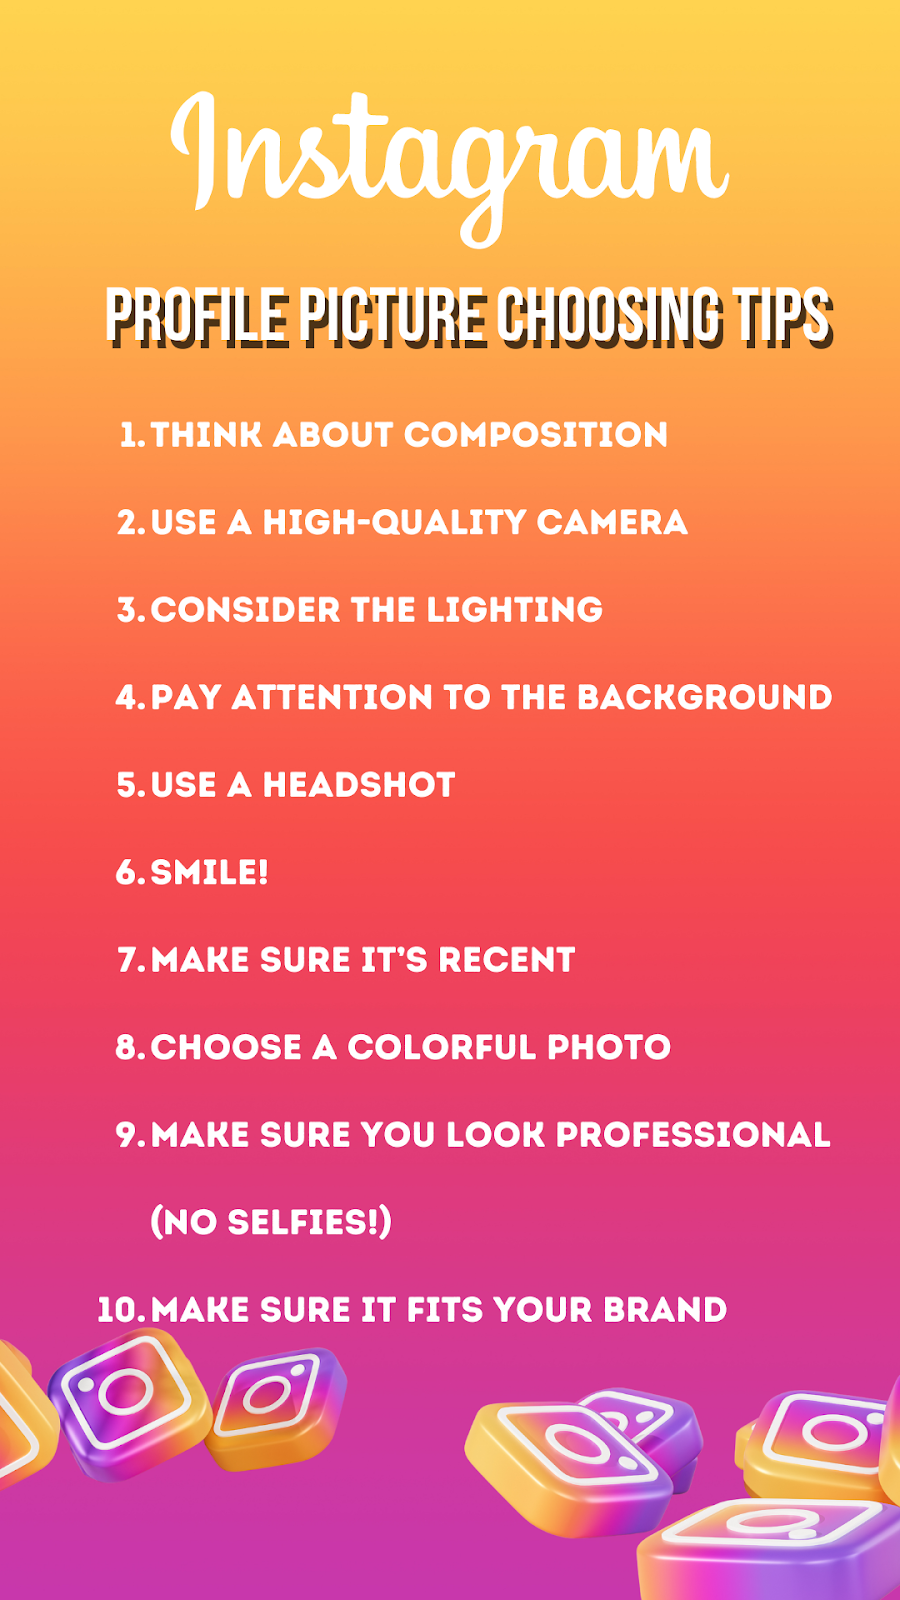 Cool Instagram profile picture — how to choose the best photo?